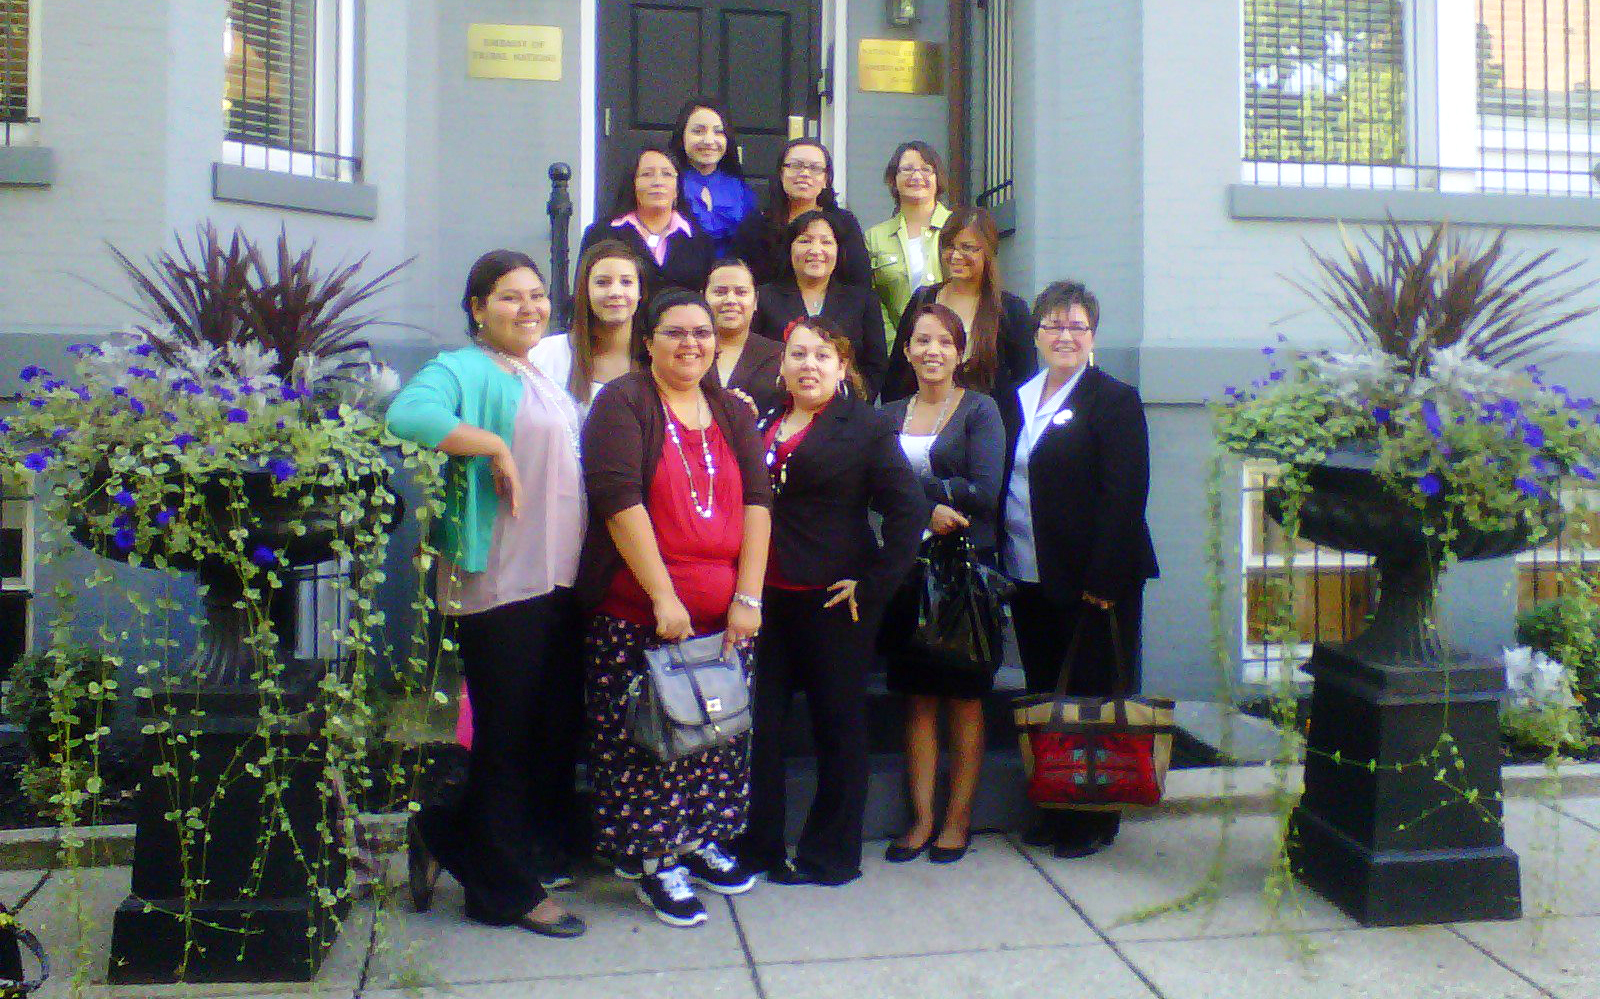 Embrey Women Leadership Group in DC. Here, they are in front of the embassy of tribal nations.